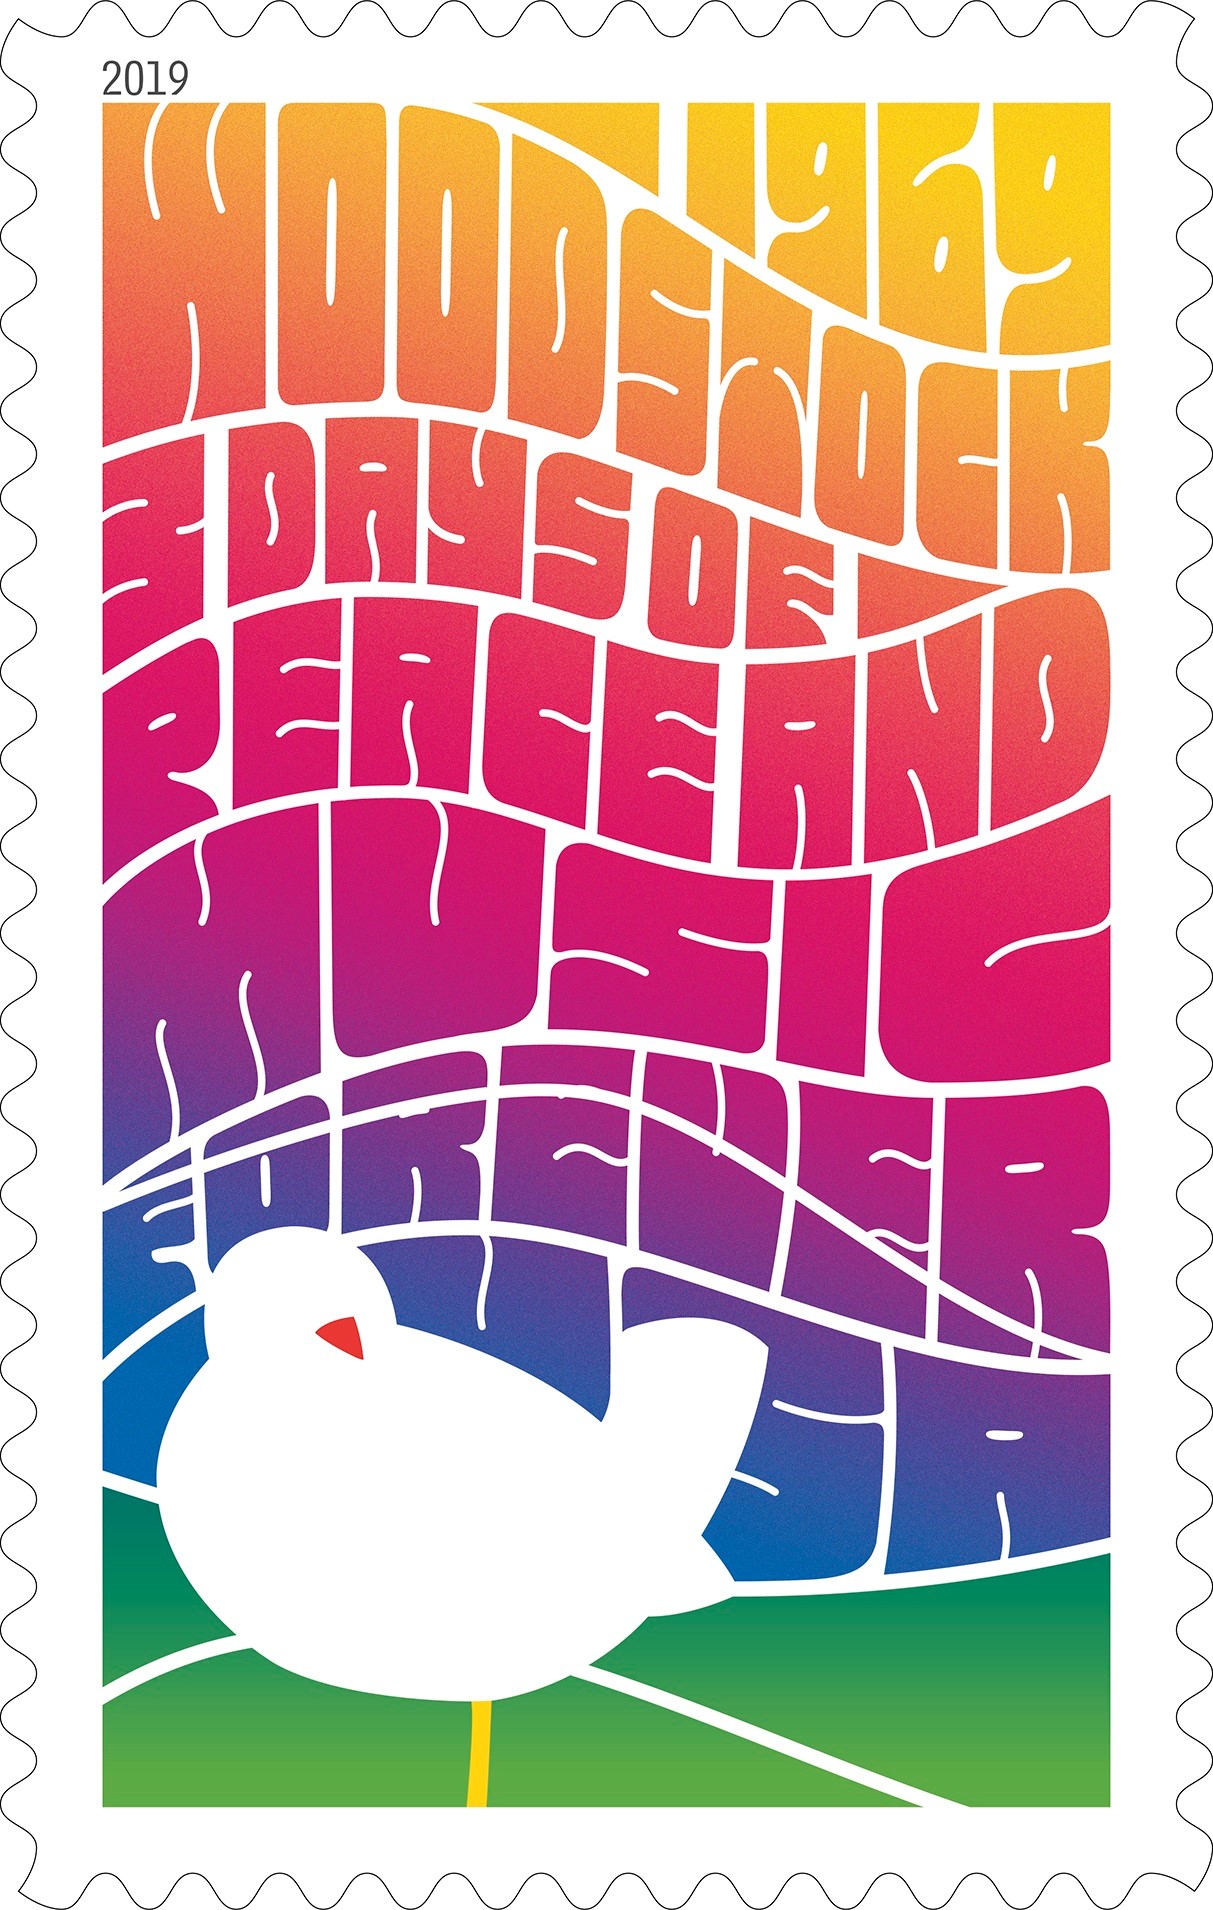 Woodstock Forever Stamps